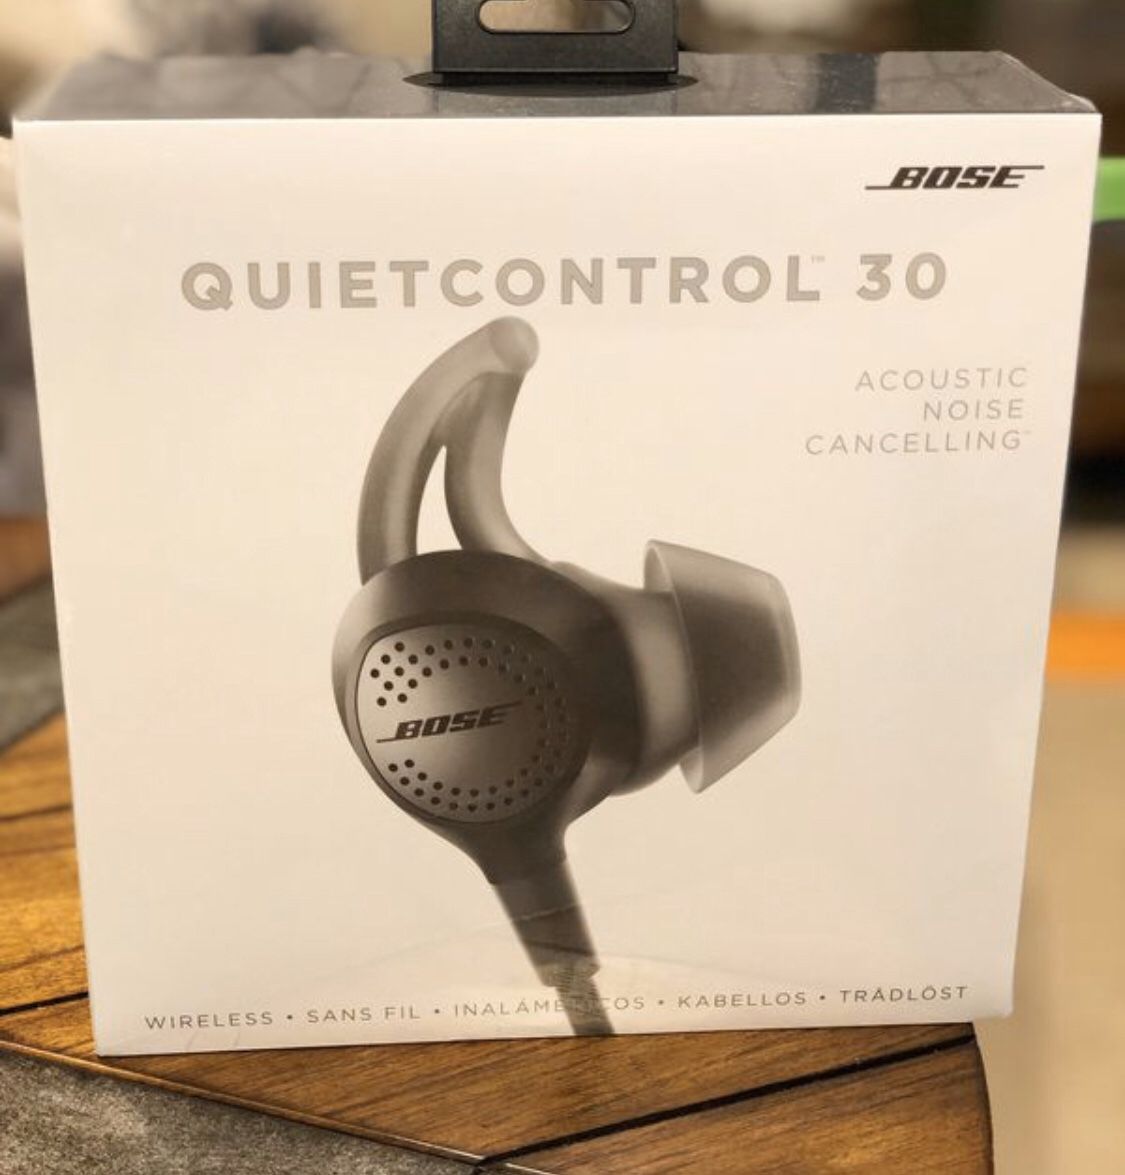 Brand New Bose QC 30 Noise Cancelling earbuds